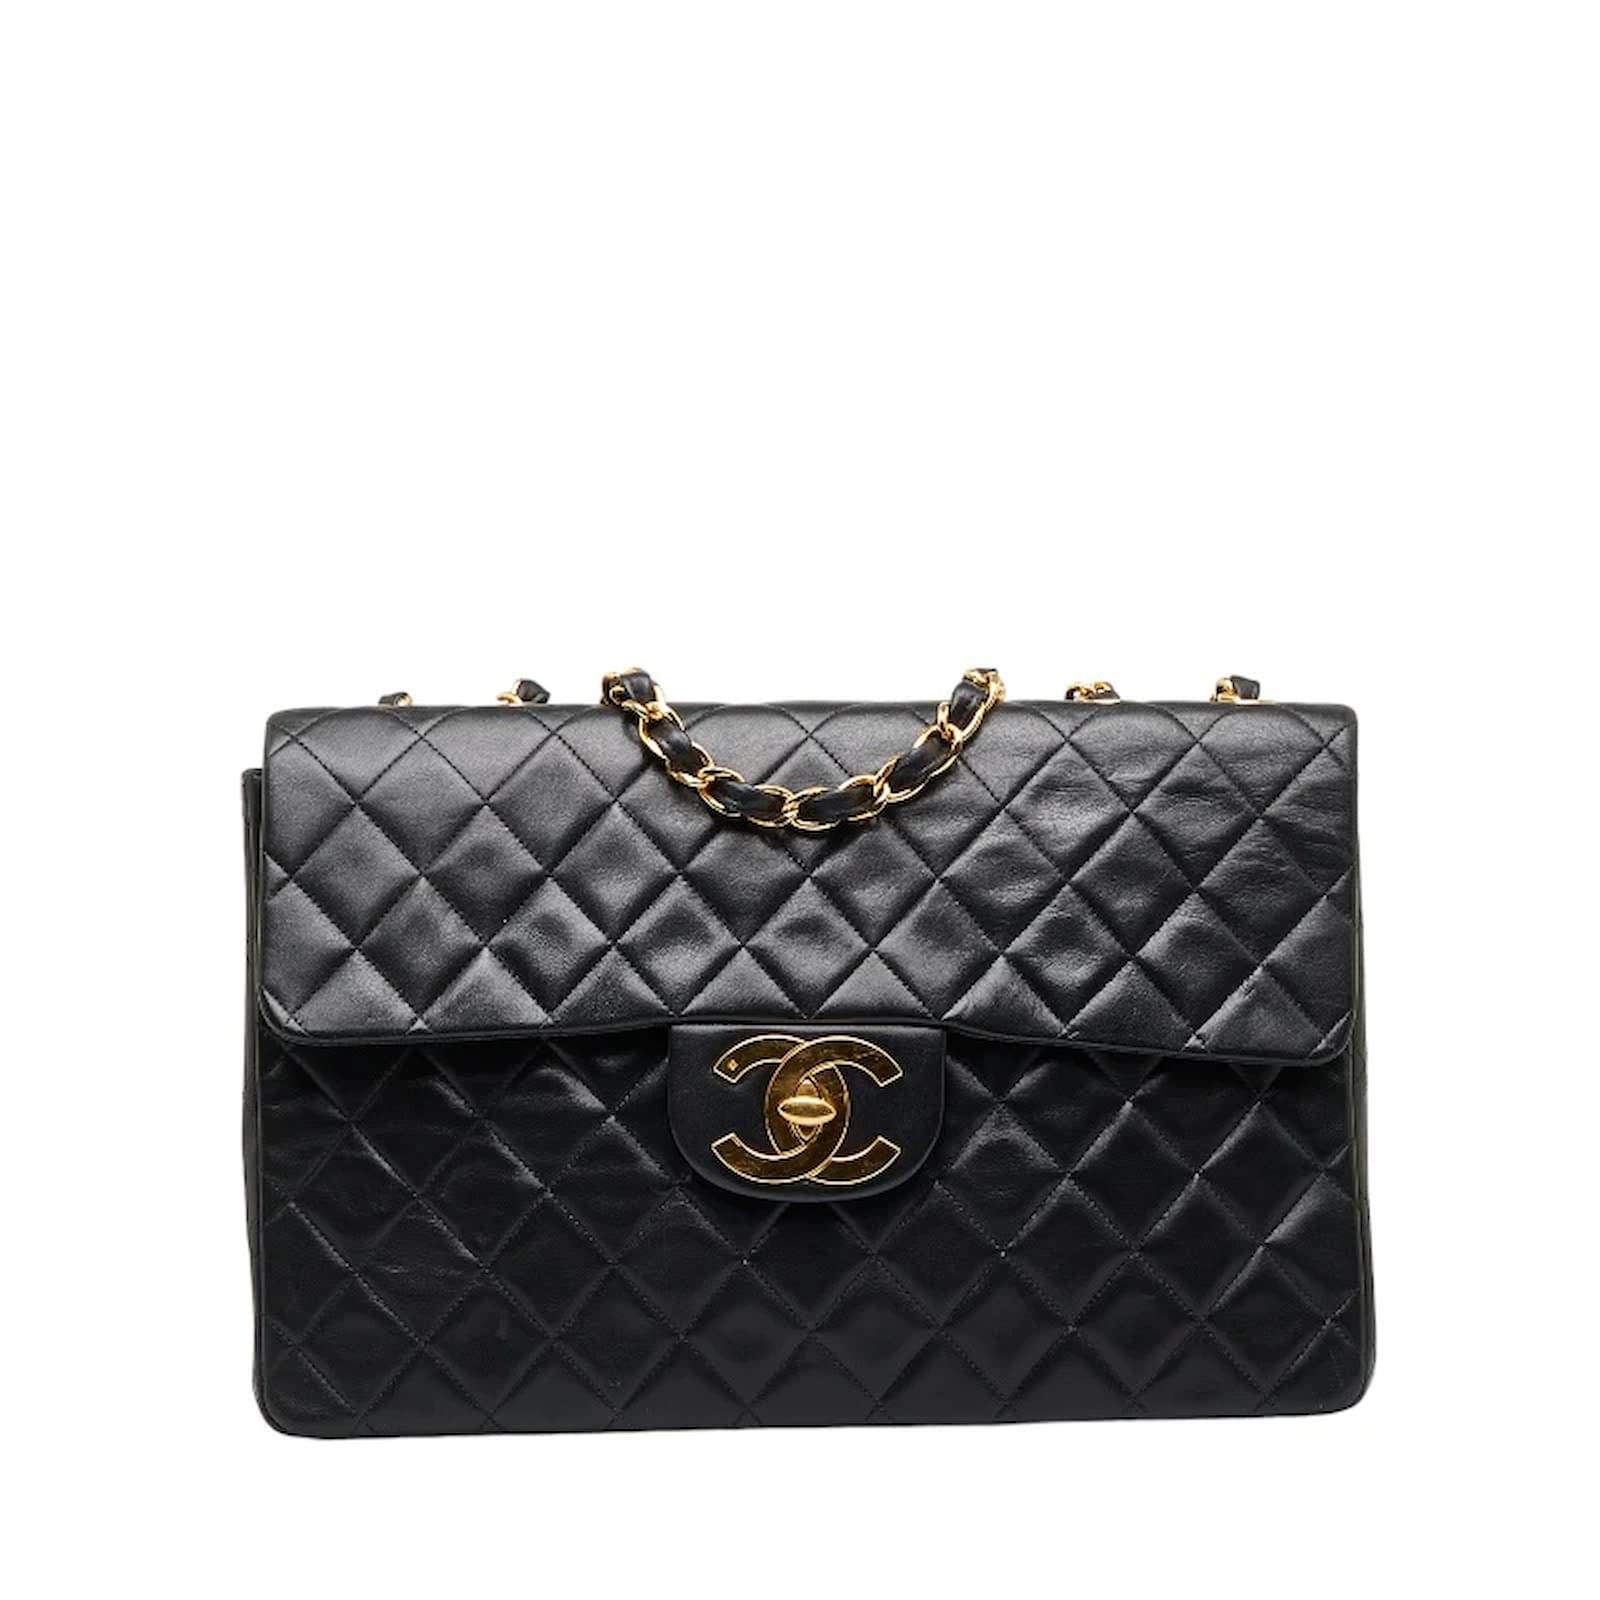 Chanel Maxi Quilted Leather Single Flap Bag Black Lambskin ref